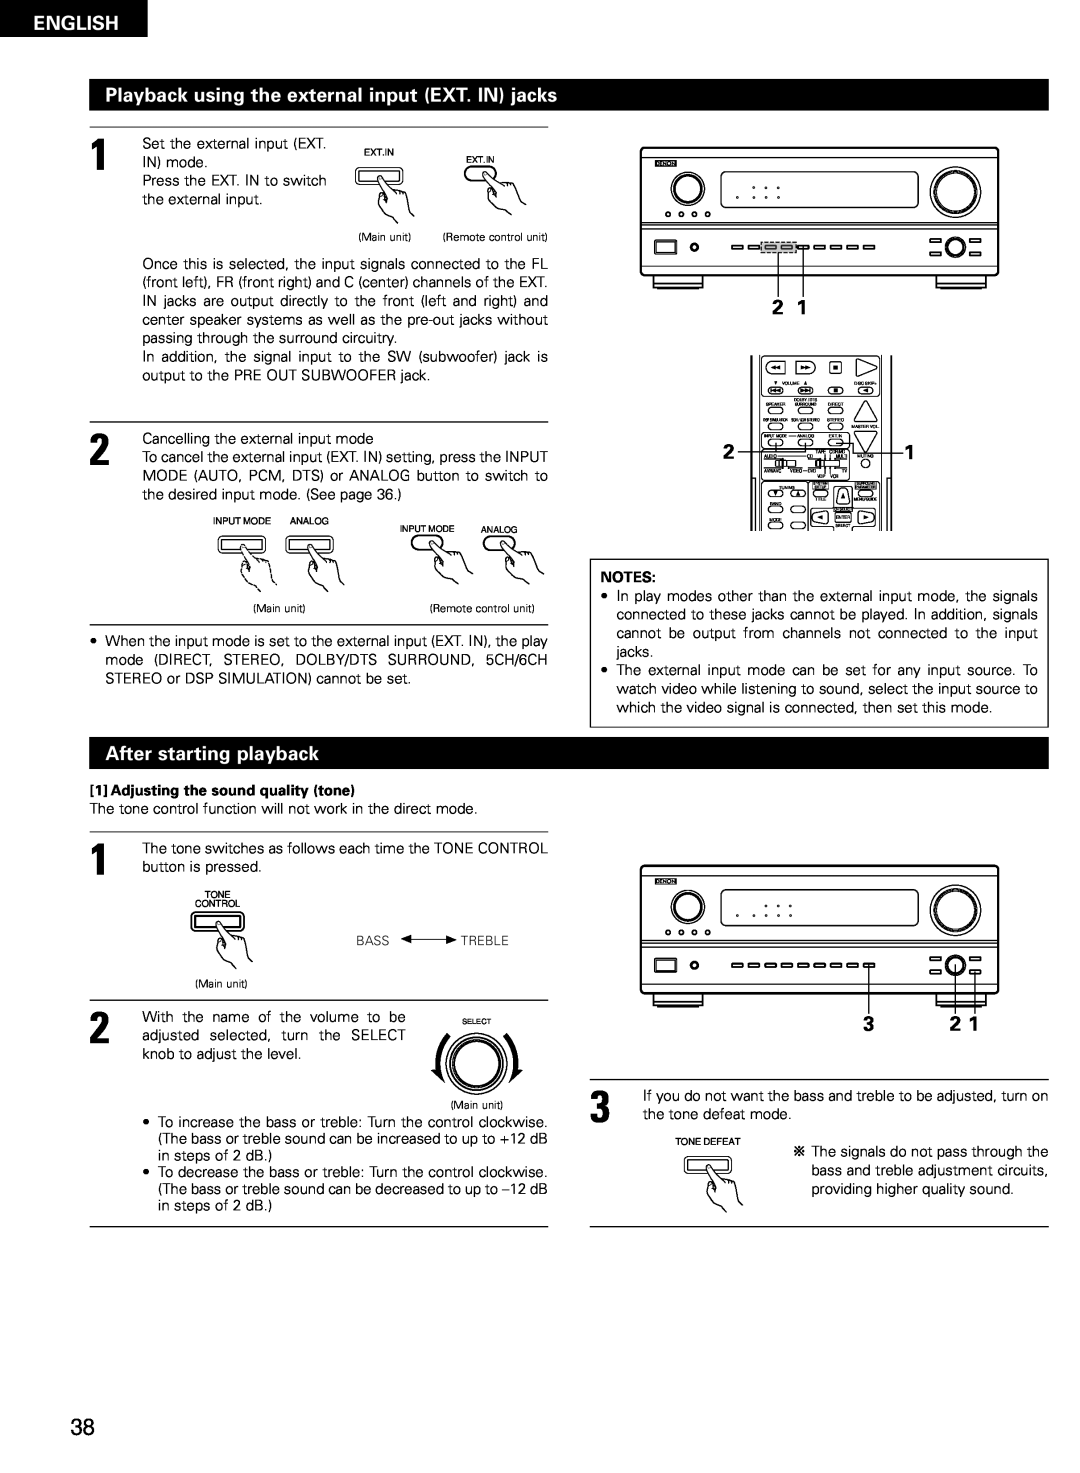 Denon AVR-2802/982 operating instructions English, Playback using the external input EXT. IN jacks, After starting playback 